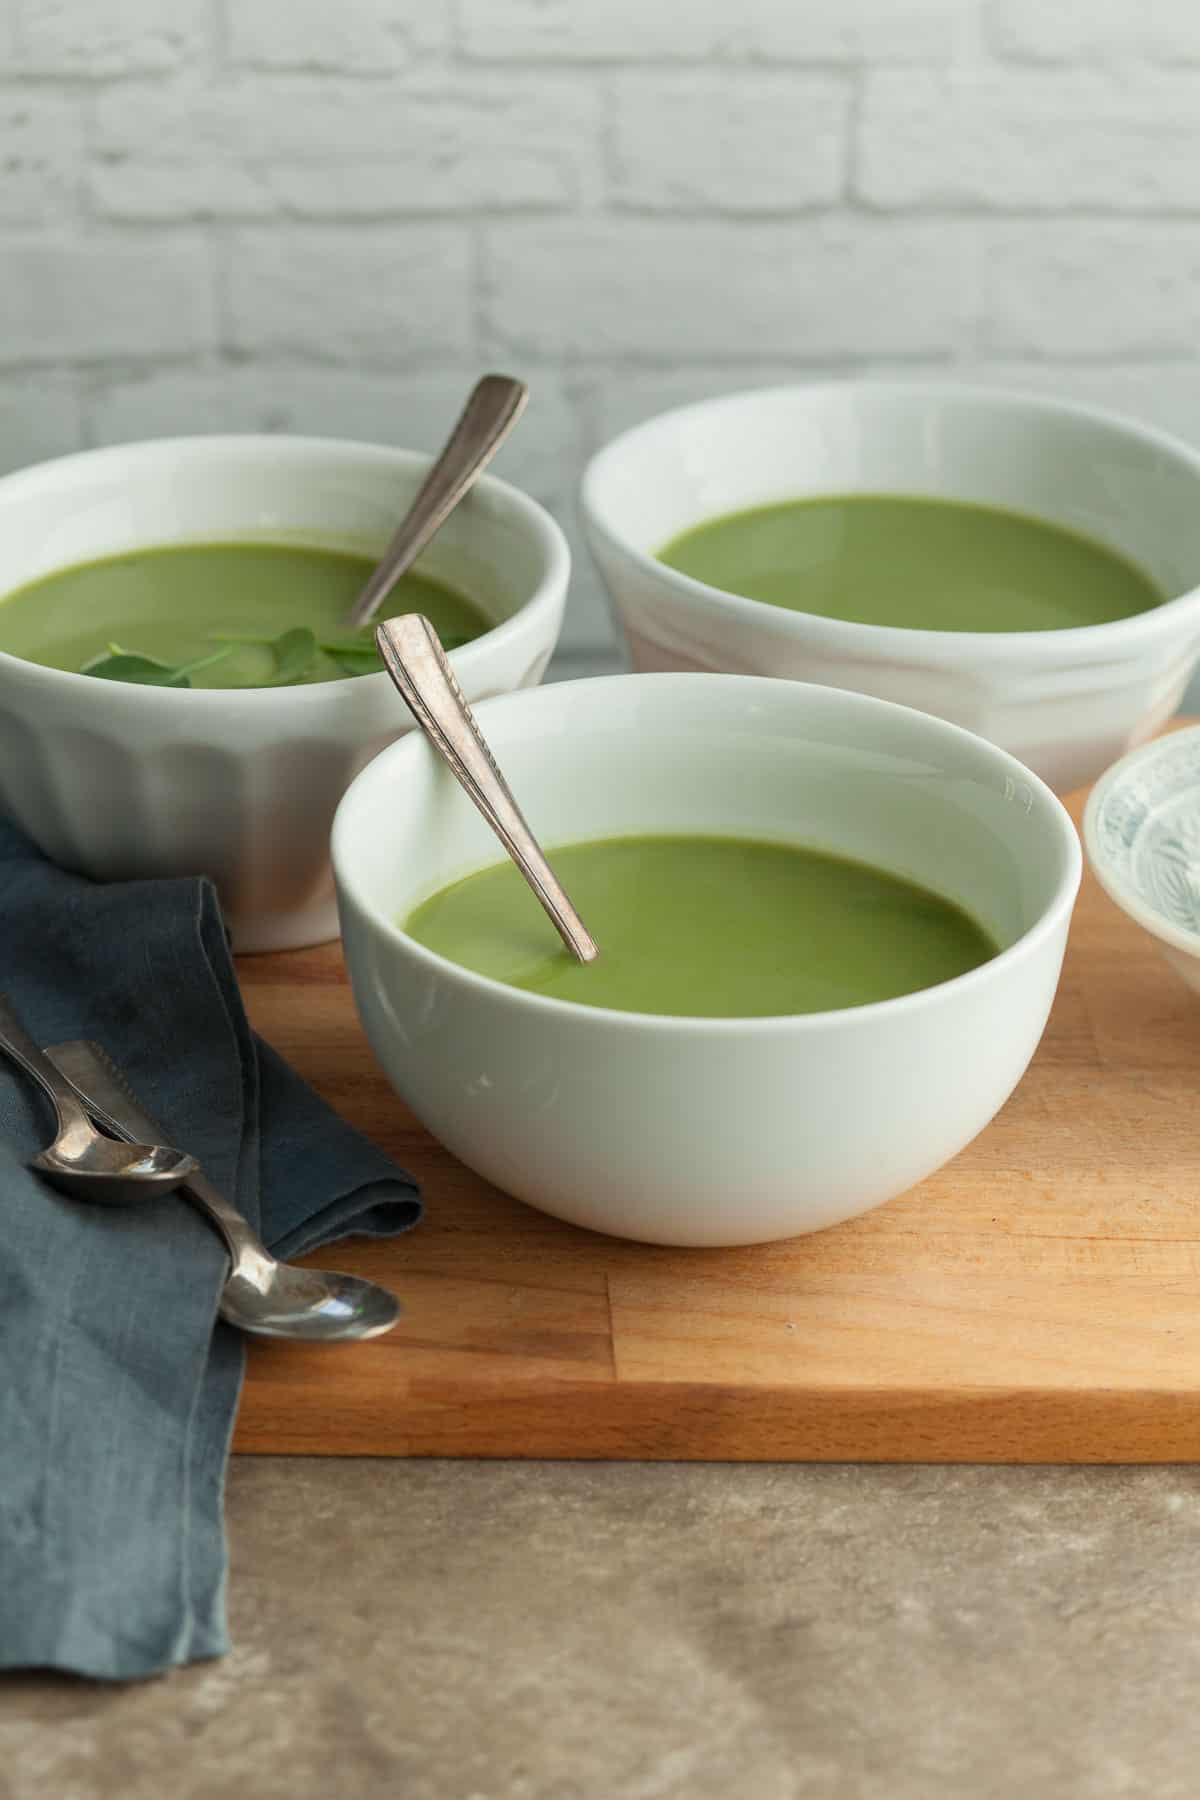 Broccoli and Spinach Soup with Spoons